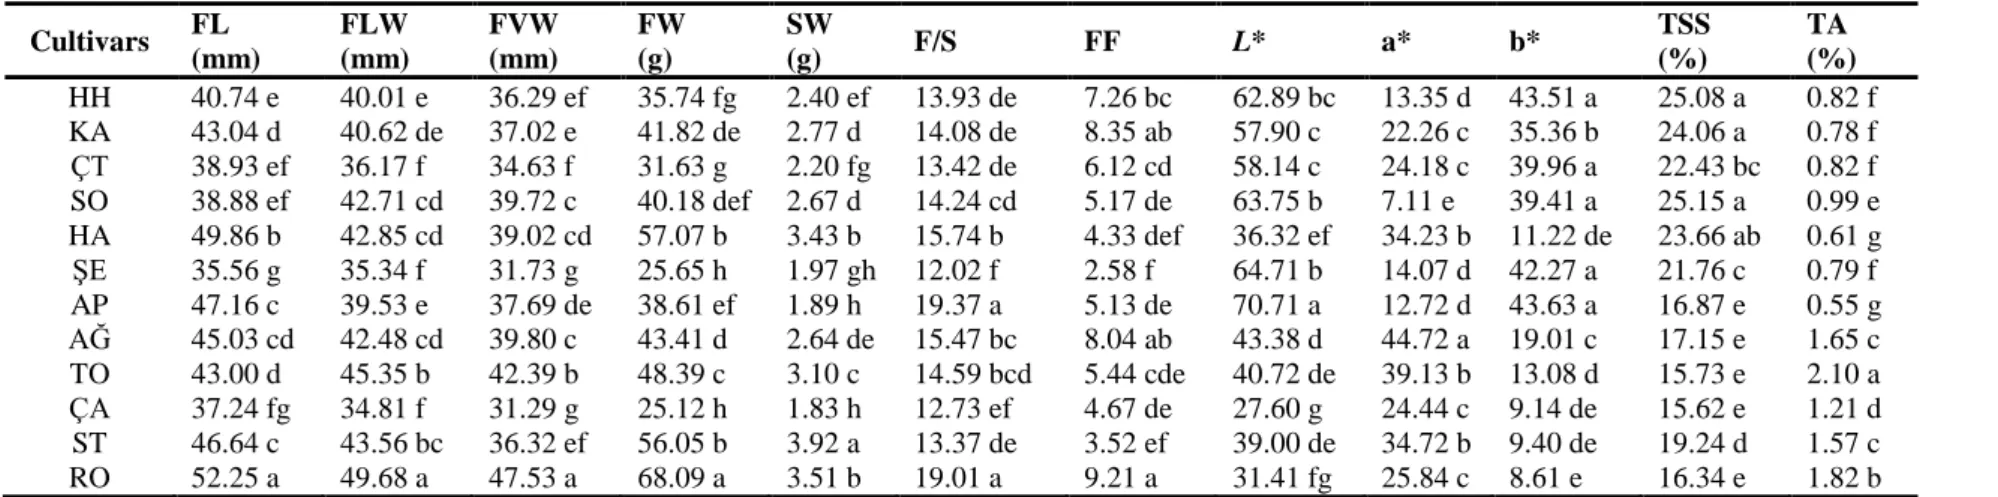 Table 3. Pomological analysis results of apricot cultivars subjected to assessments 